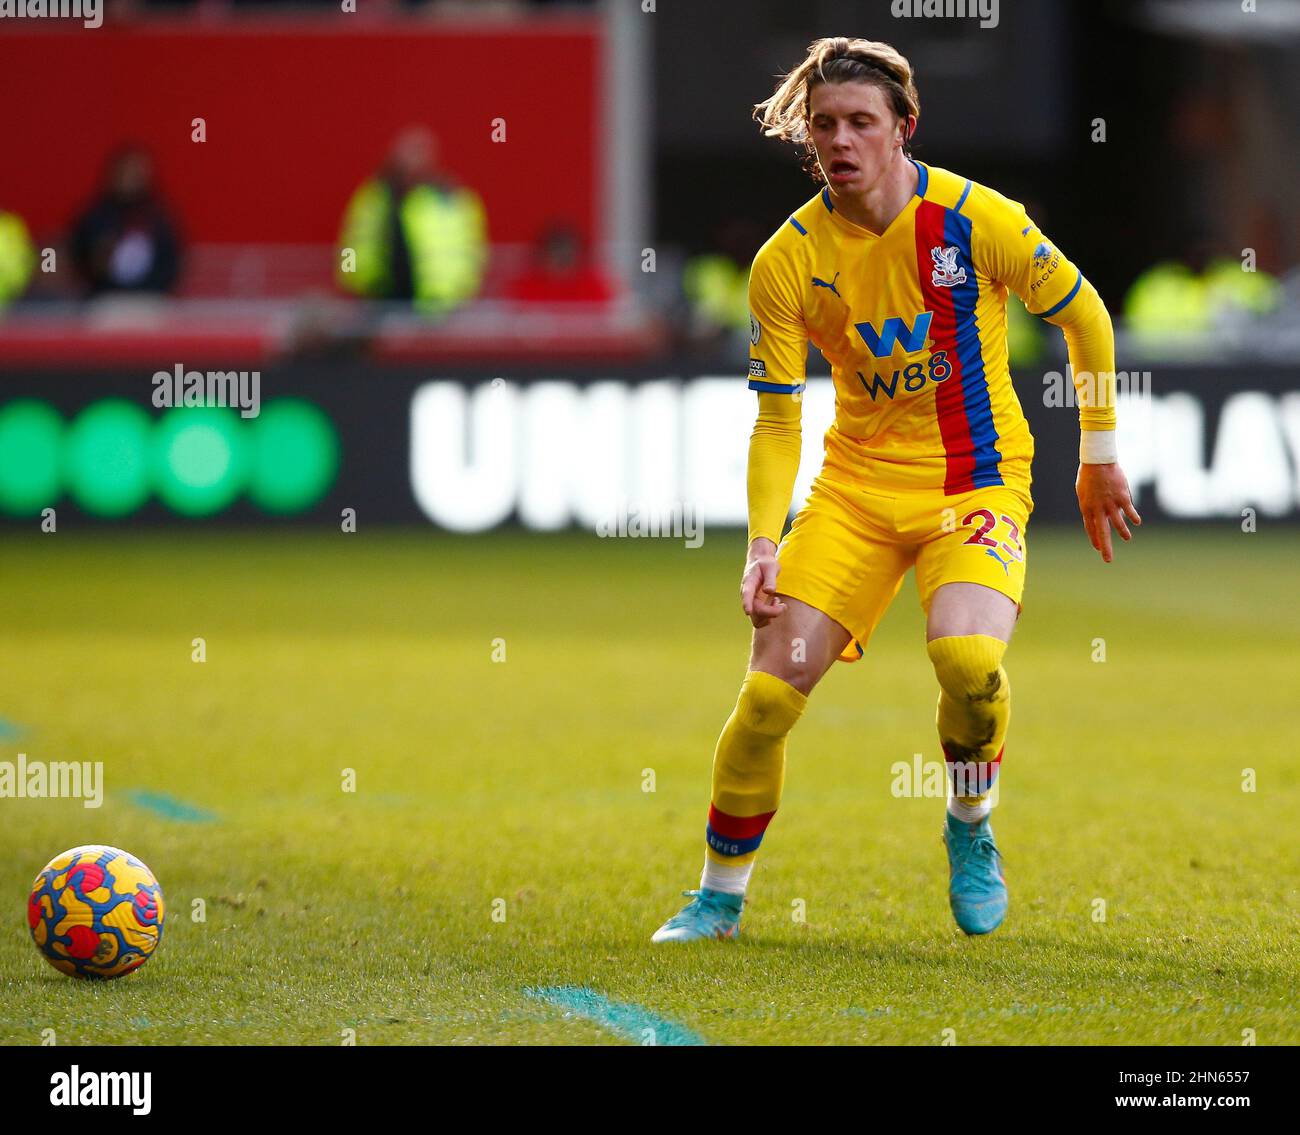 London, England - FEBRUARY 12: Crystal Palace's Conor Gallagher (on loan from Chelsea) during  Premier League between Brentford and Crystal Palace at Stock Photo